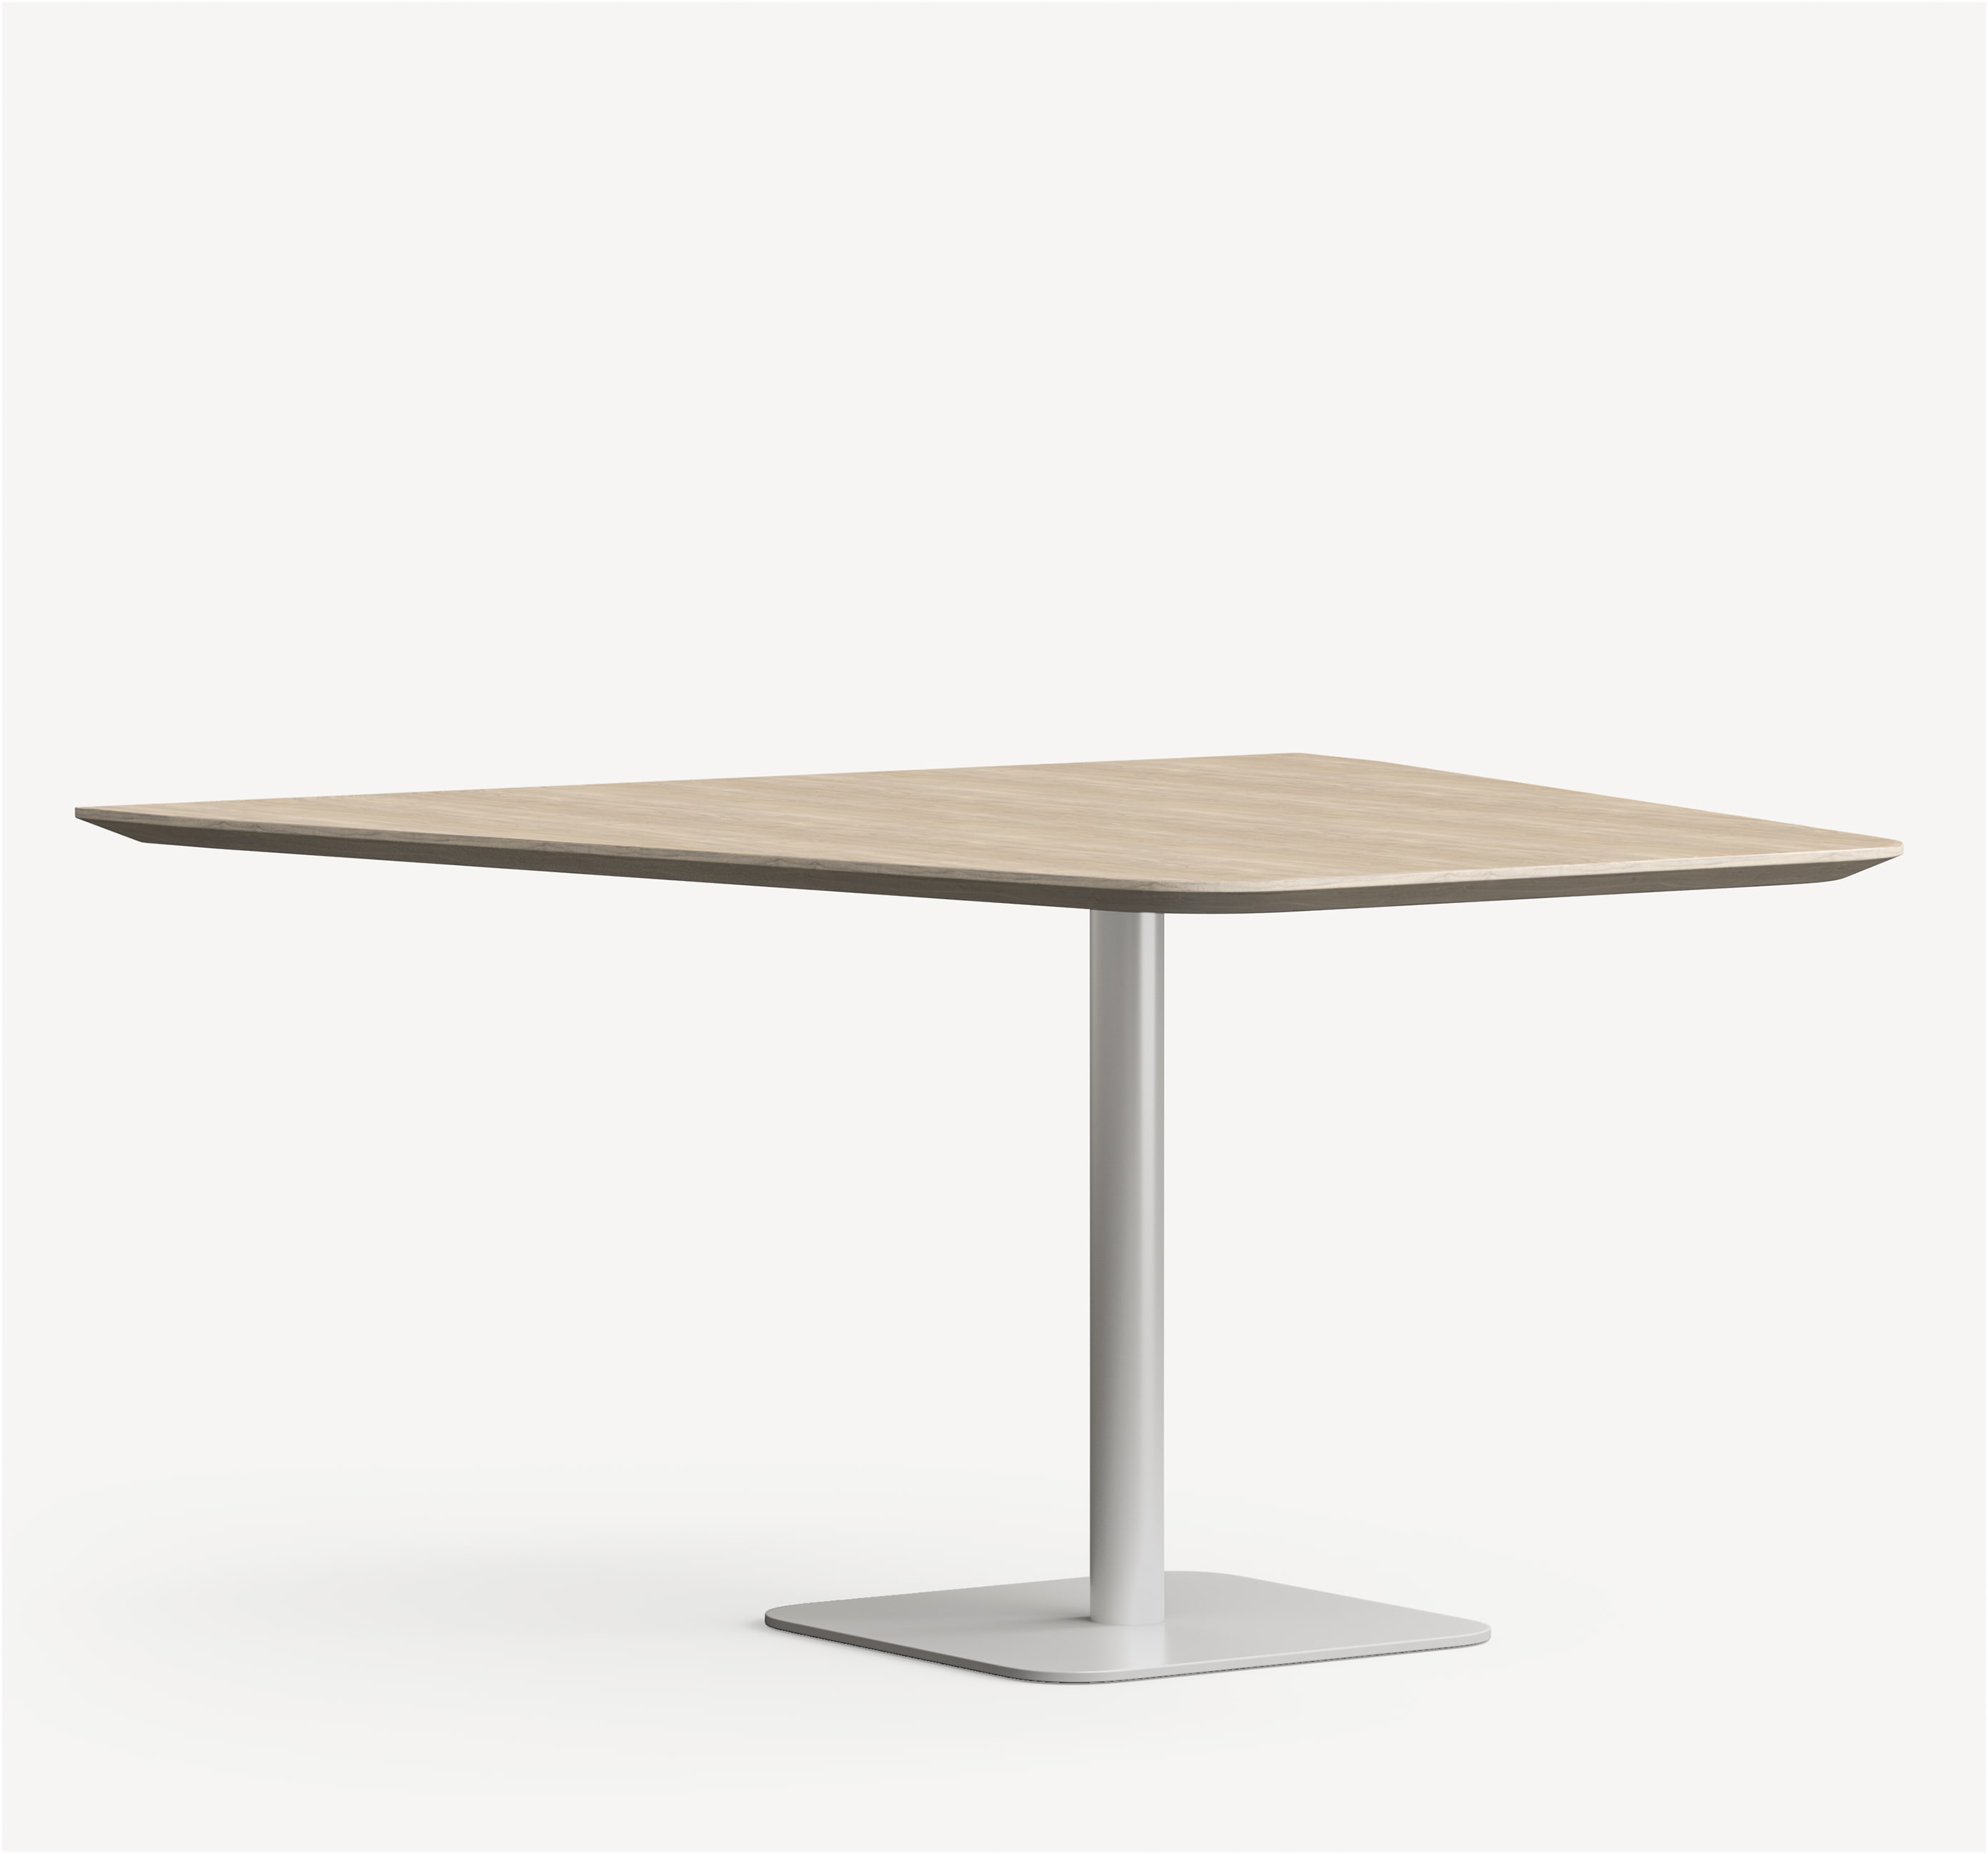 Allsteel Structure media collaborative table with square pedestal base and half-diamond, light laminate top.